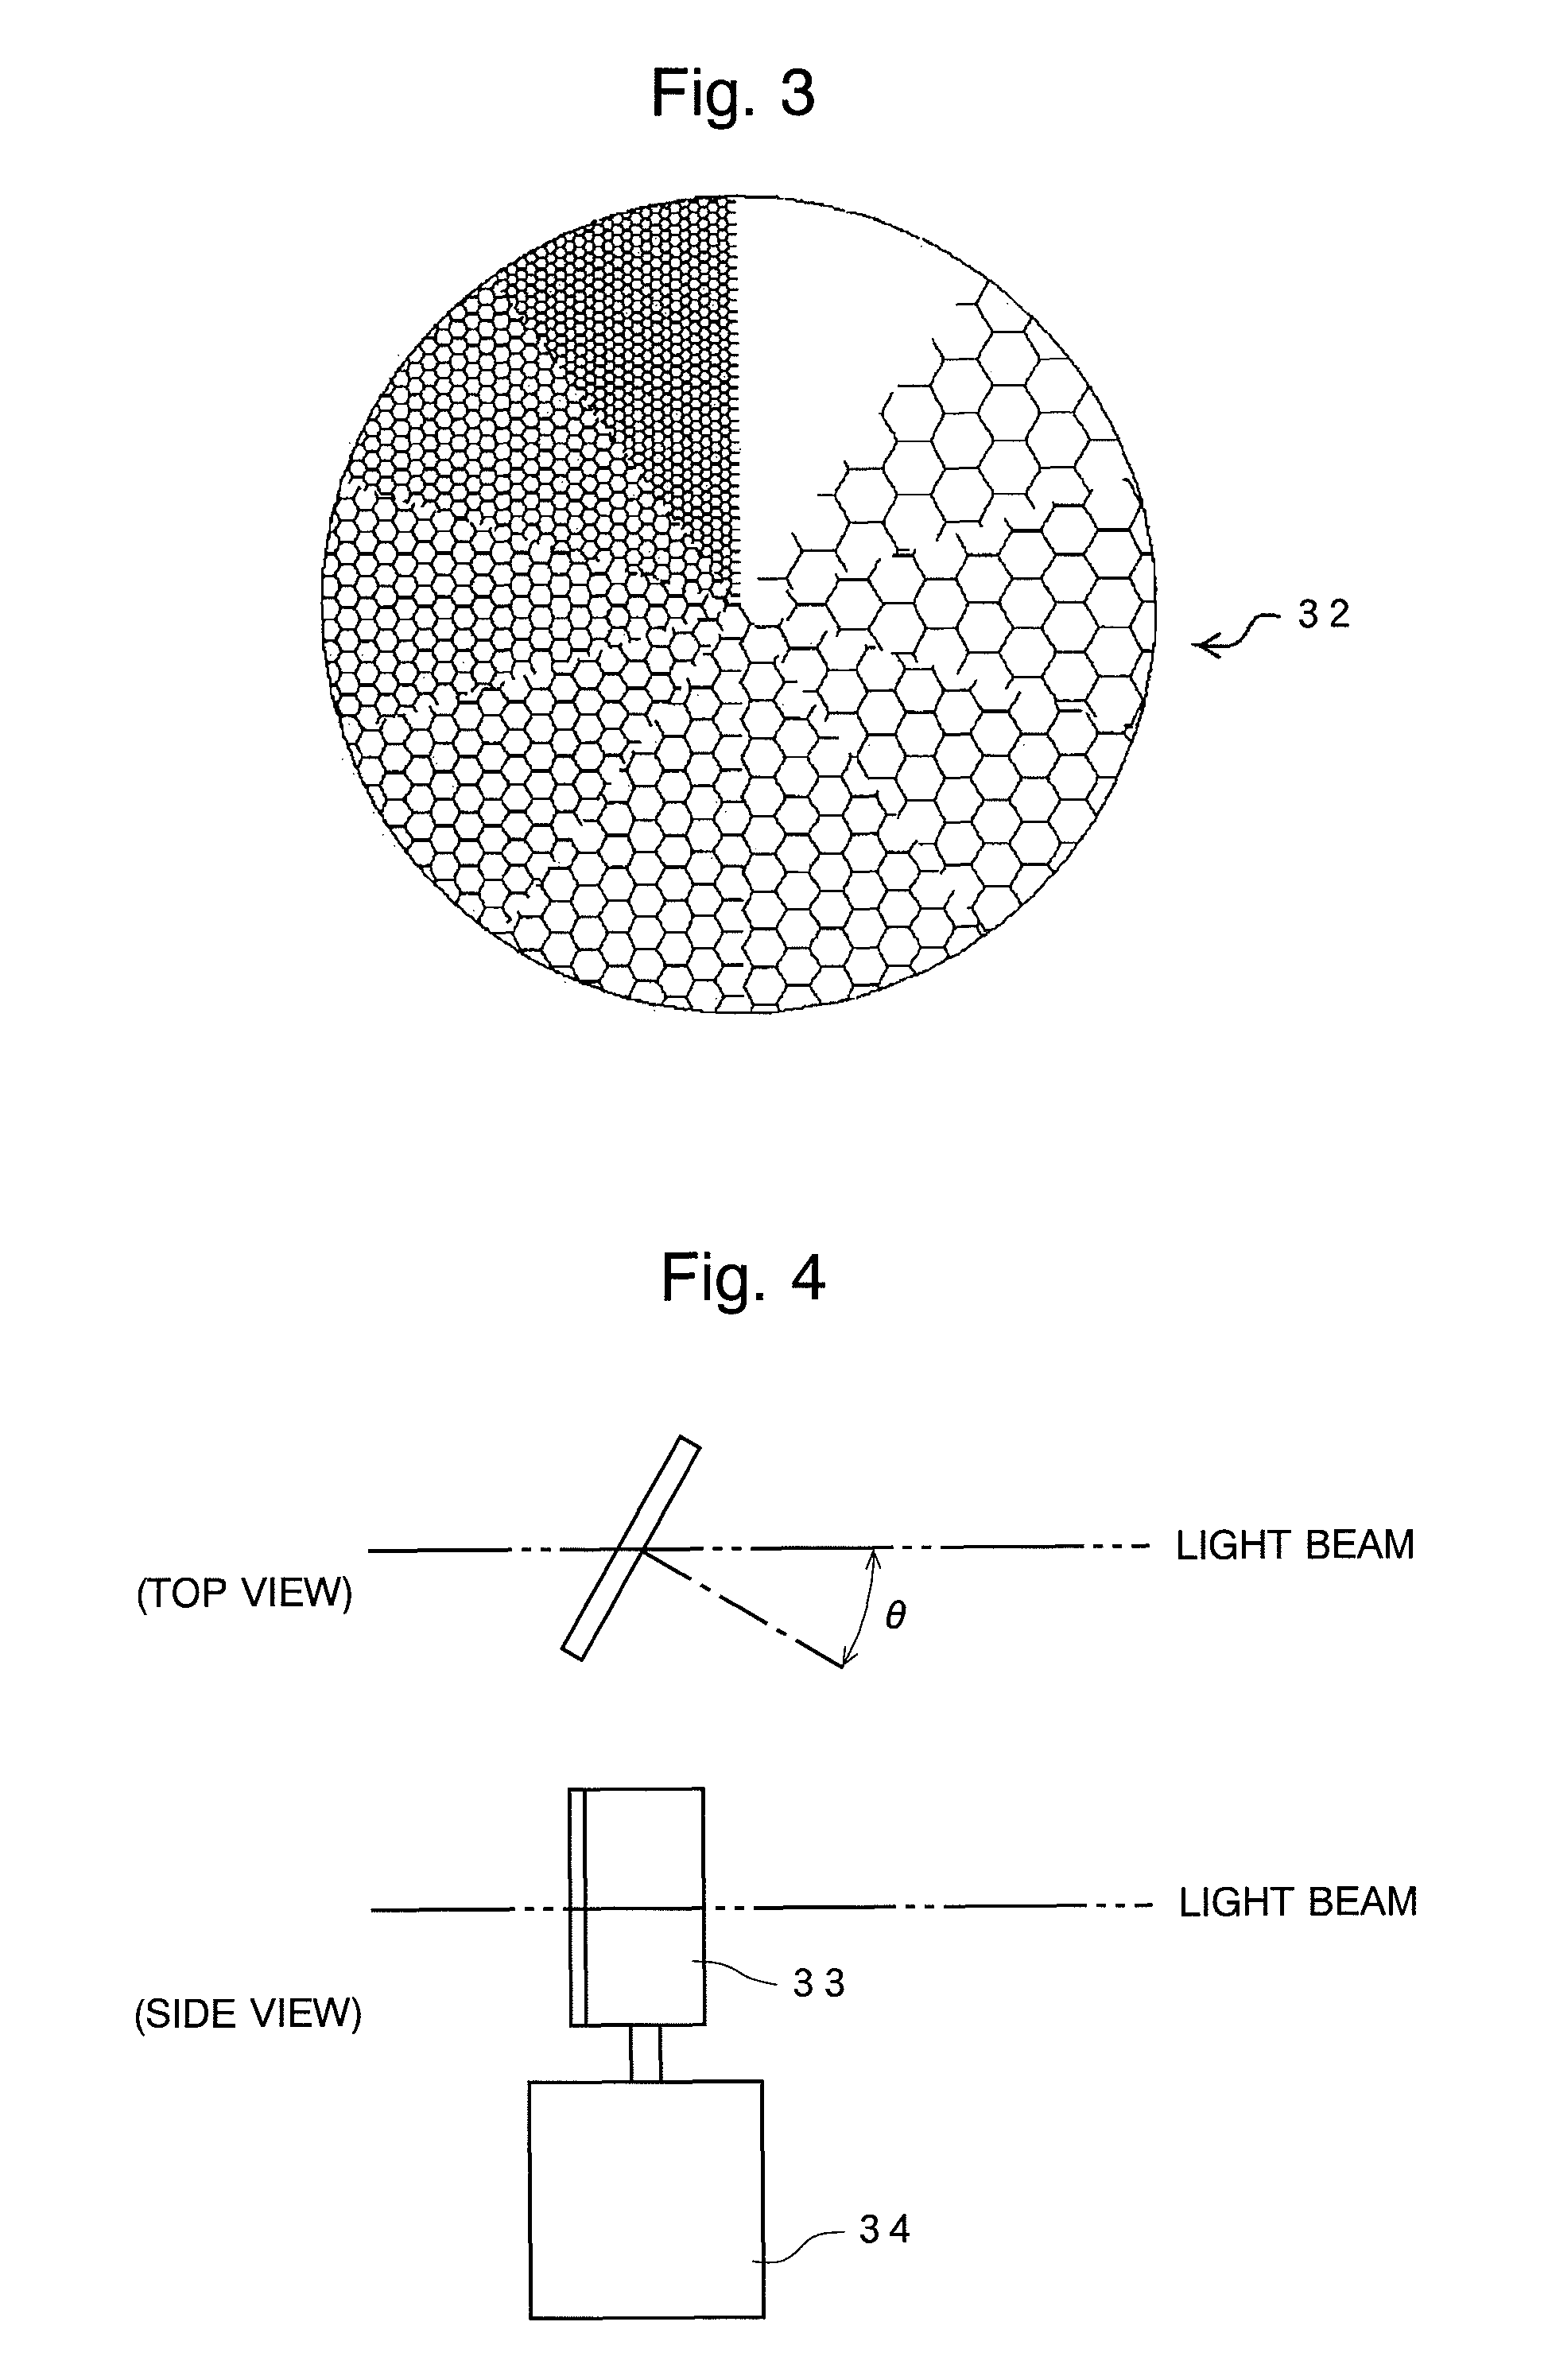 Atomic absorption spectrophotometer